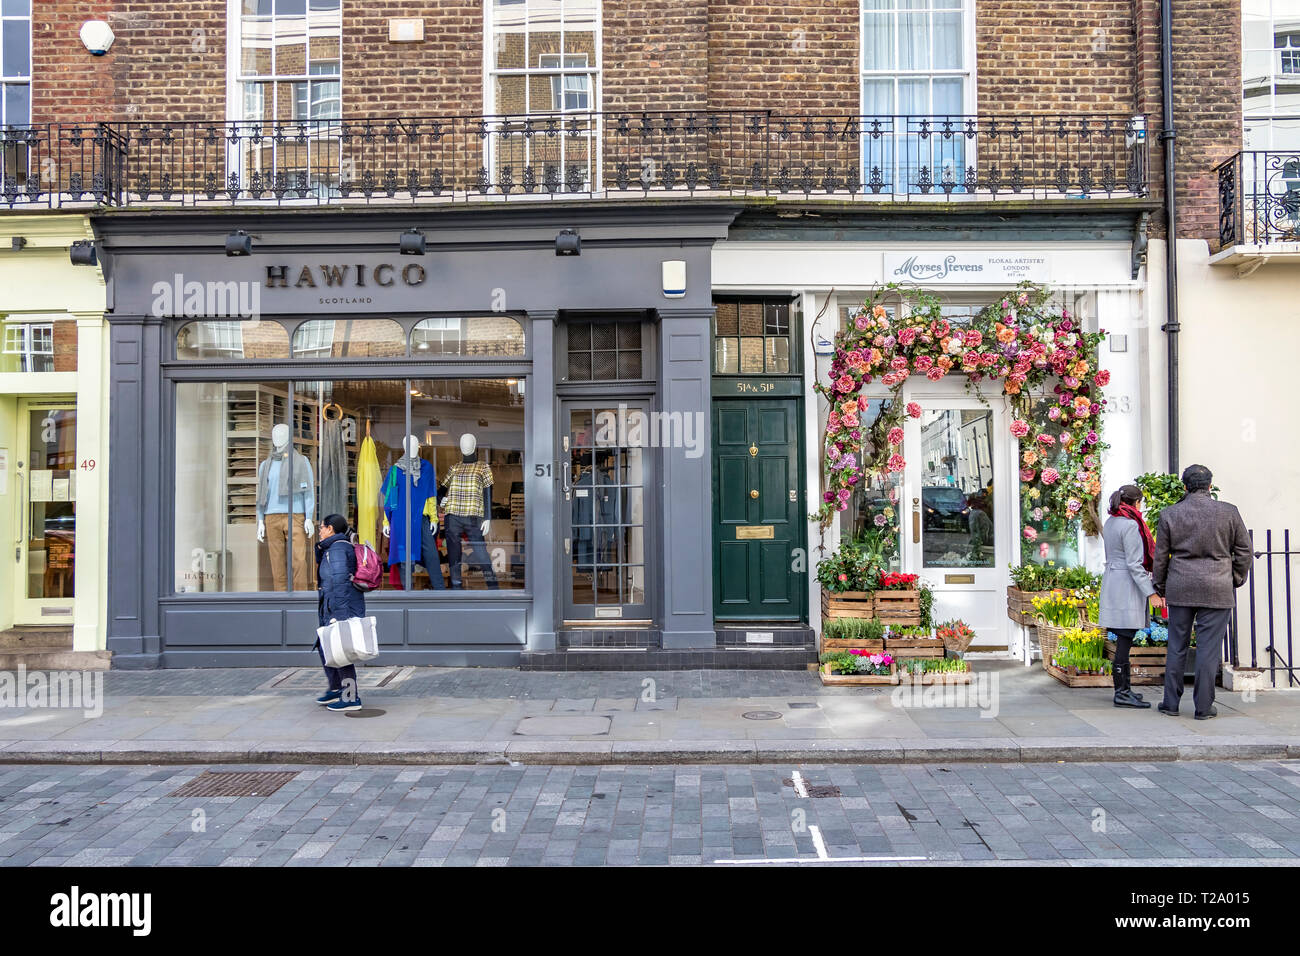 A woman walks past Hawico a luxury cashmere and knitwear shop as a couple look at displays outside Moyses Stevens florists in Belgravia ,London ,UK Stock Photo